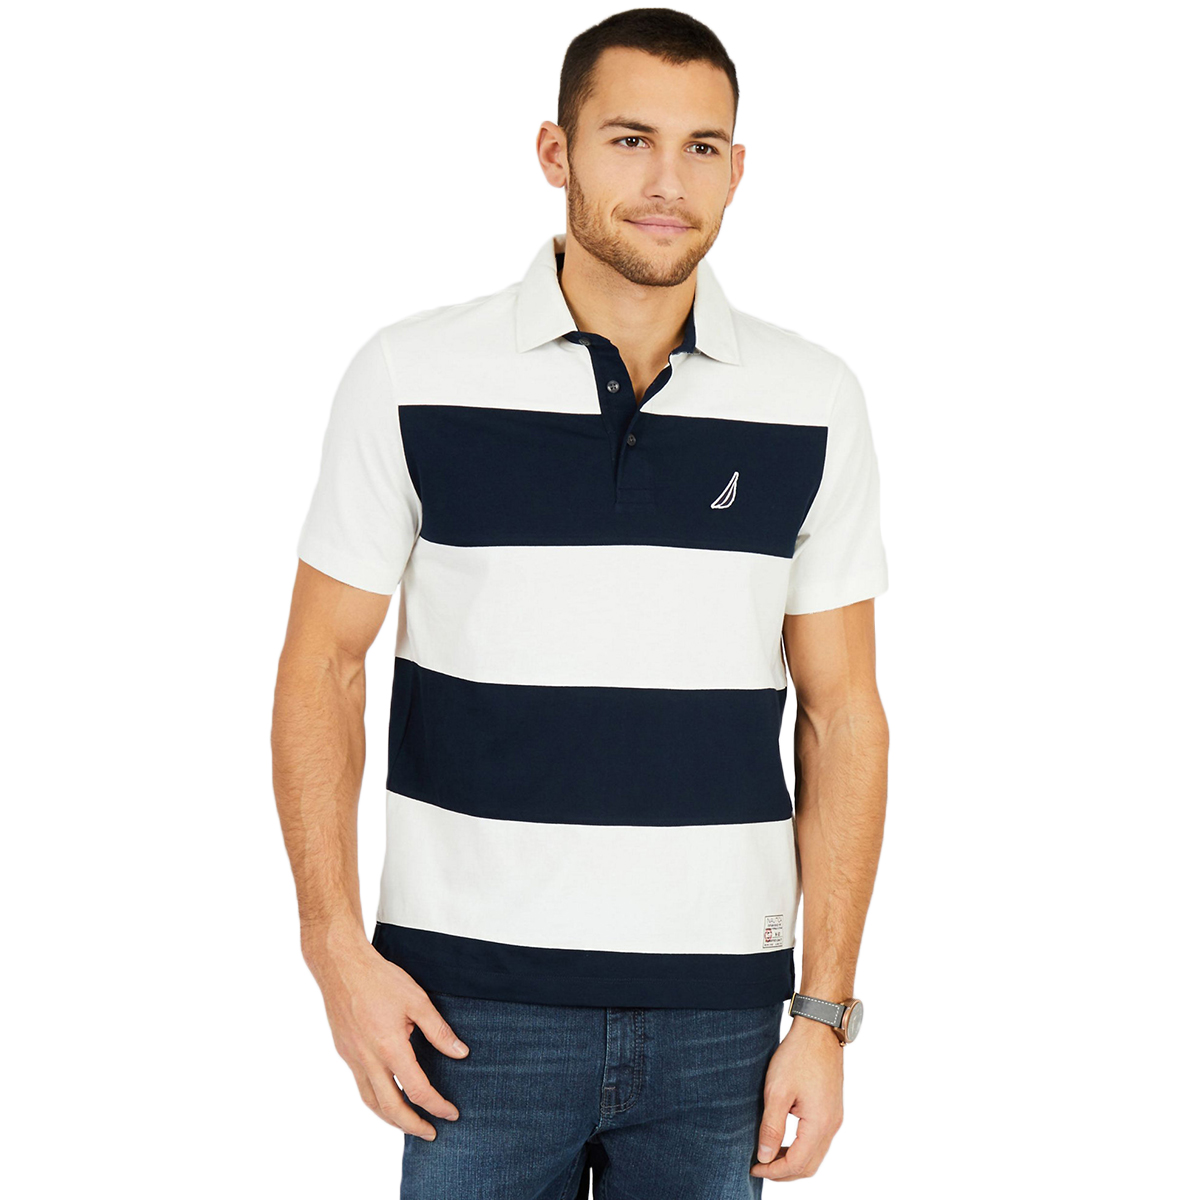 Nautica Men's Short Sleeve Classic Fit Rugby Stripe Polo Shirt - White, L